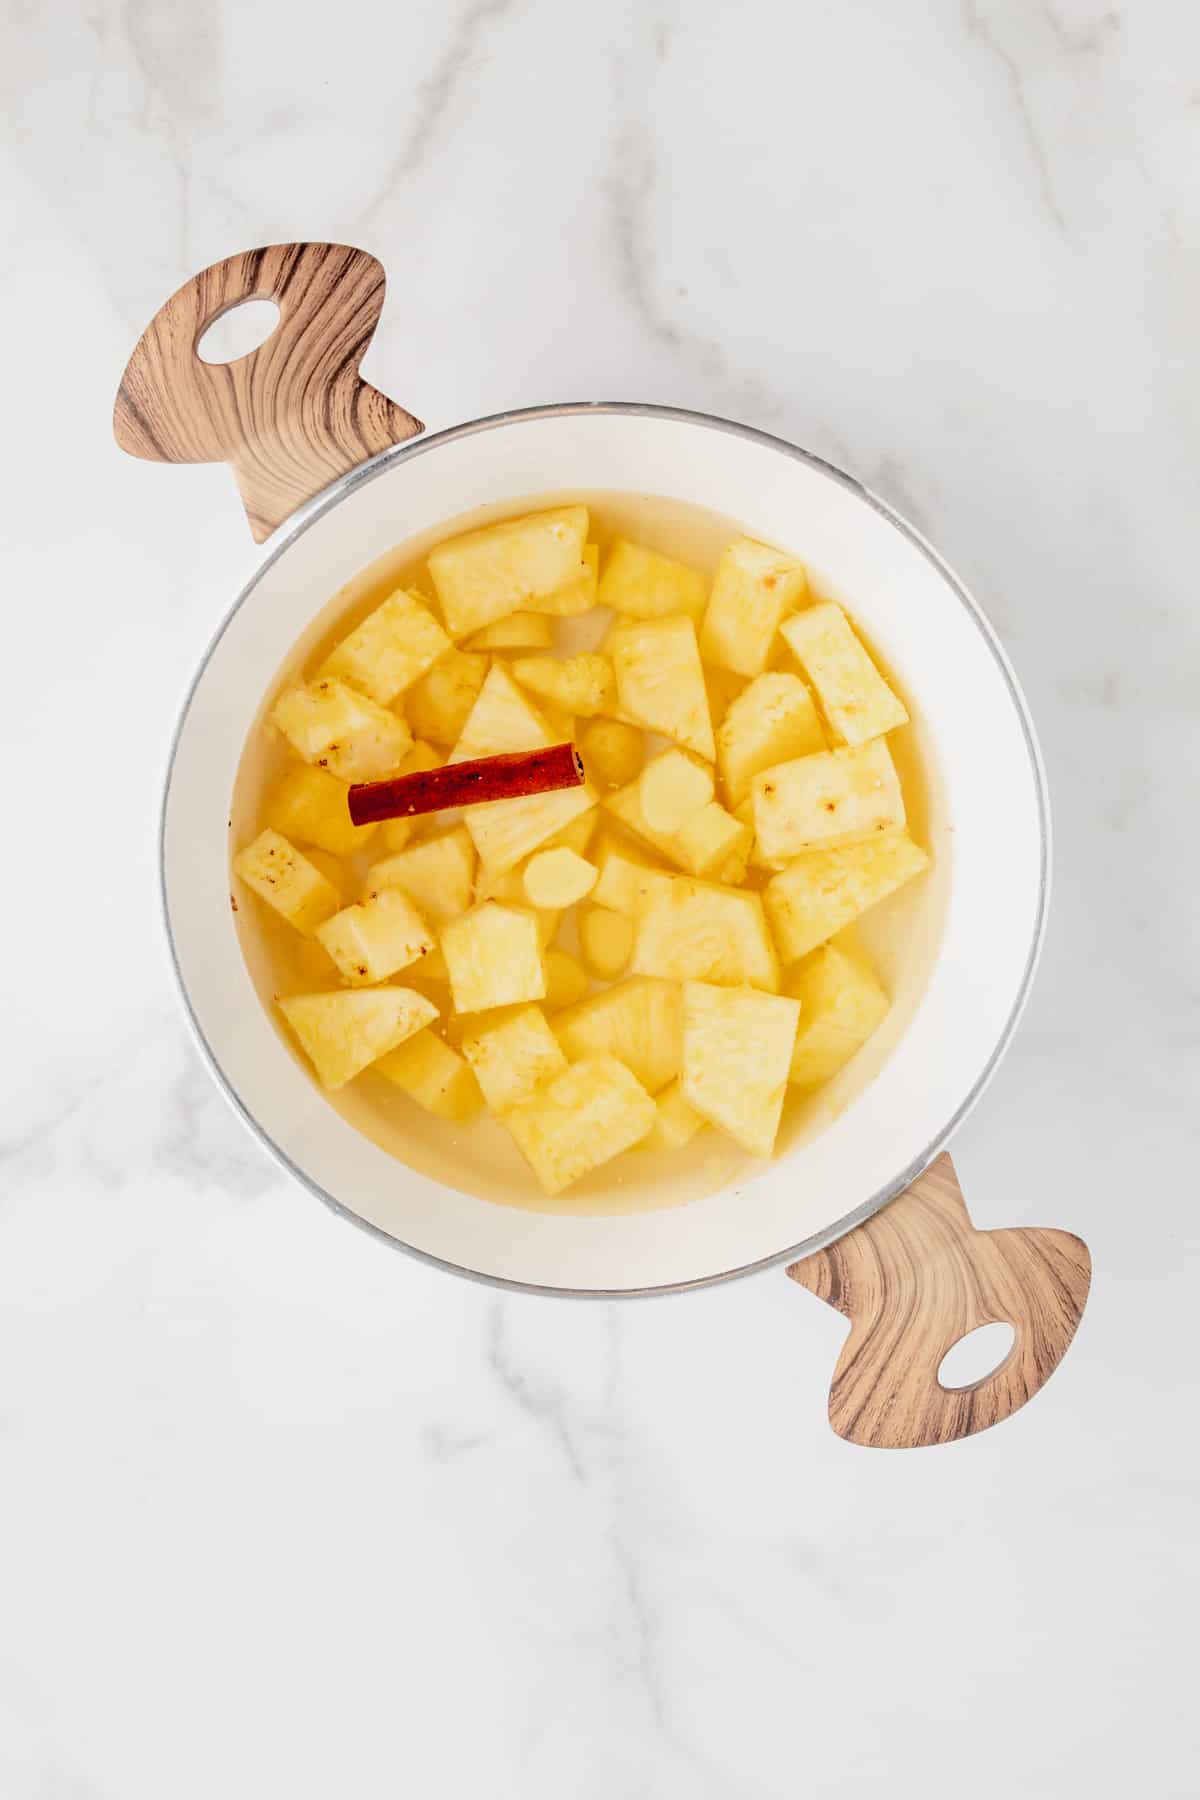 Pineapple, cinnamon, and ginger simmering in a pot full of water.